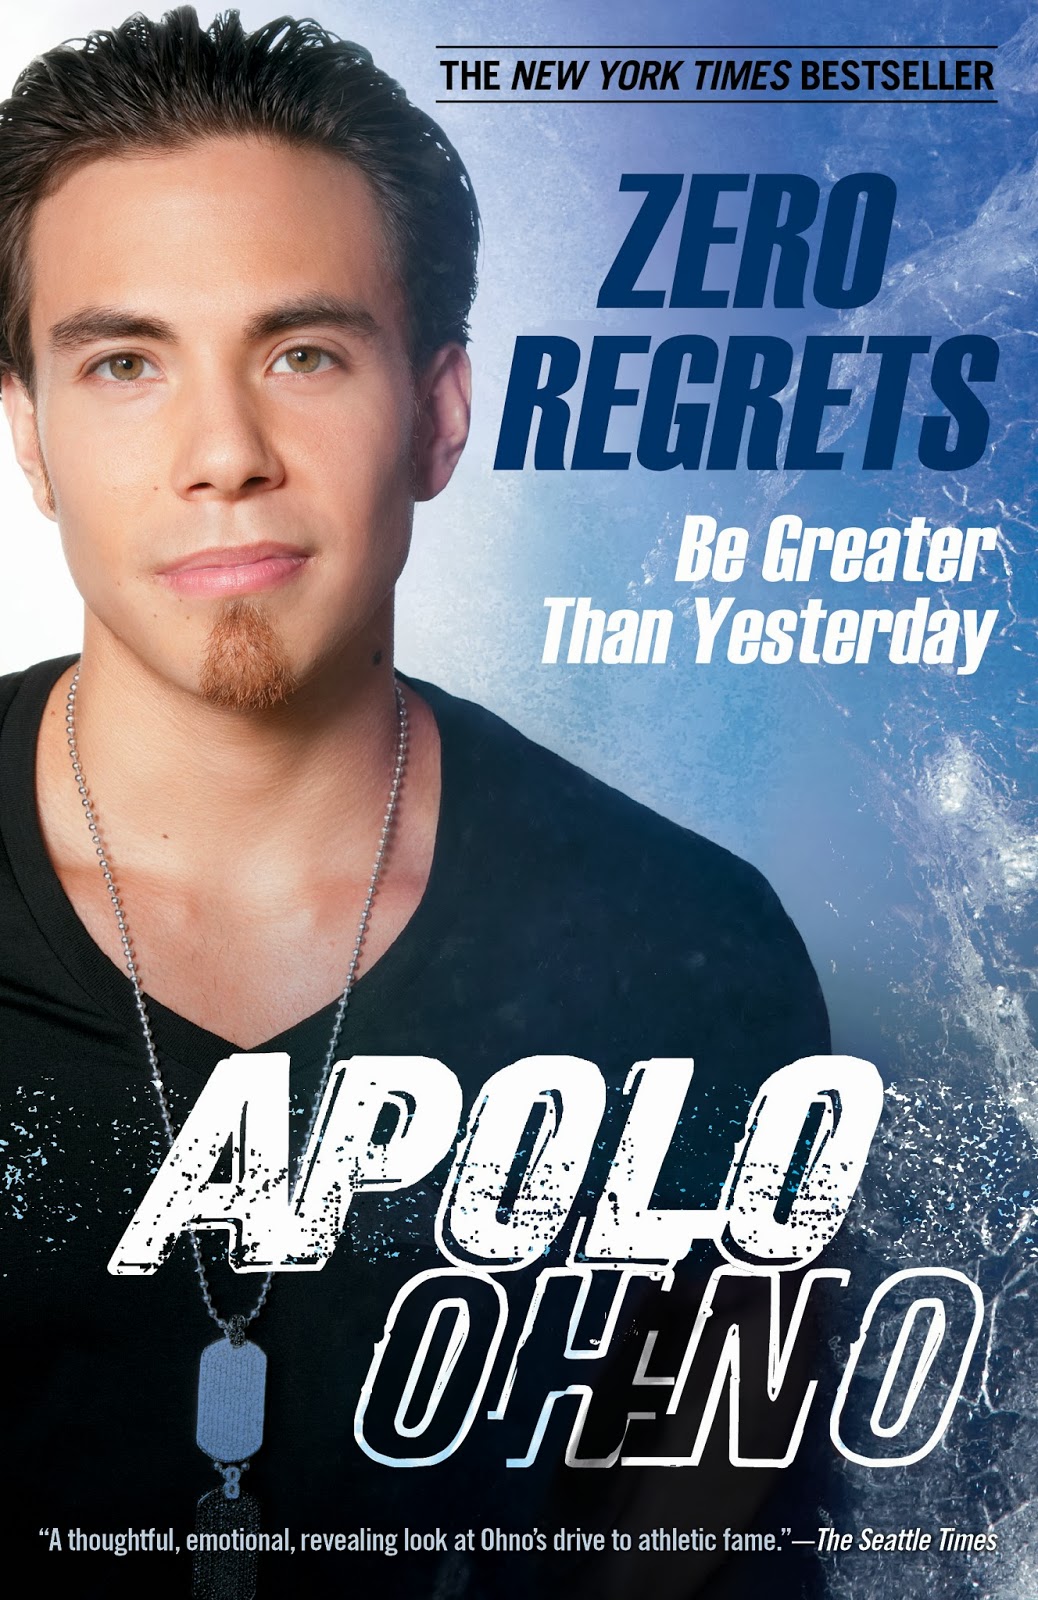 http://discover.halifaxpubliclibraries.ca/?q=title:zero%20regrets%20be%20greater%20than%20yesterday